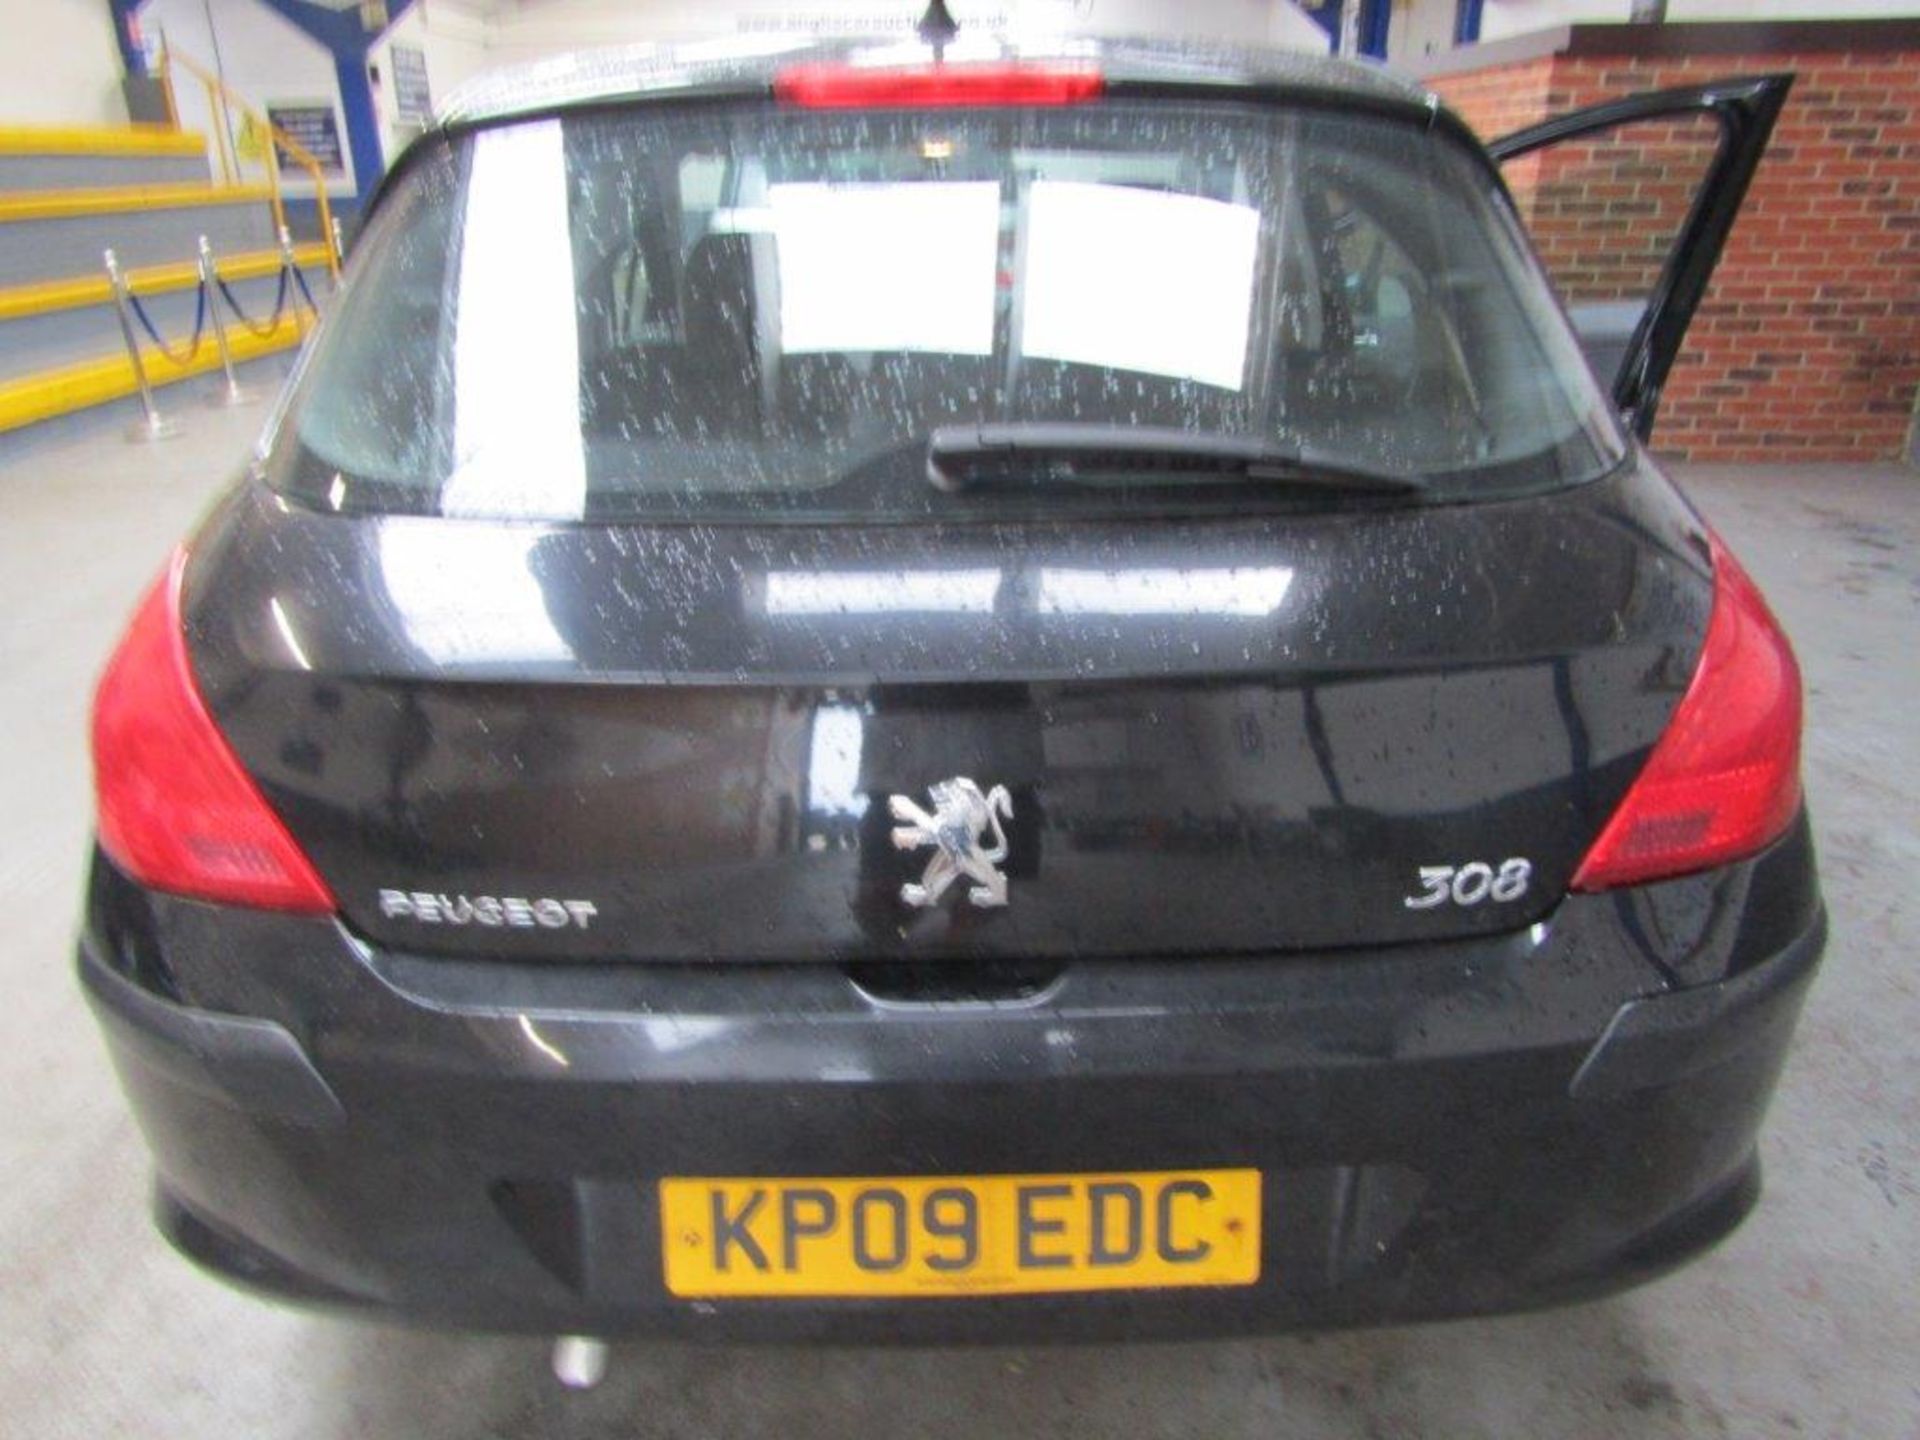 09 09 Peugeot 308 S HDI - Image 2 of 13